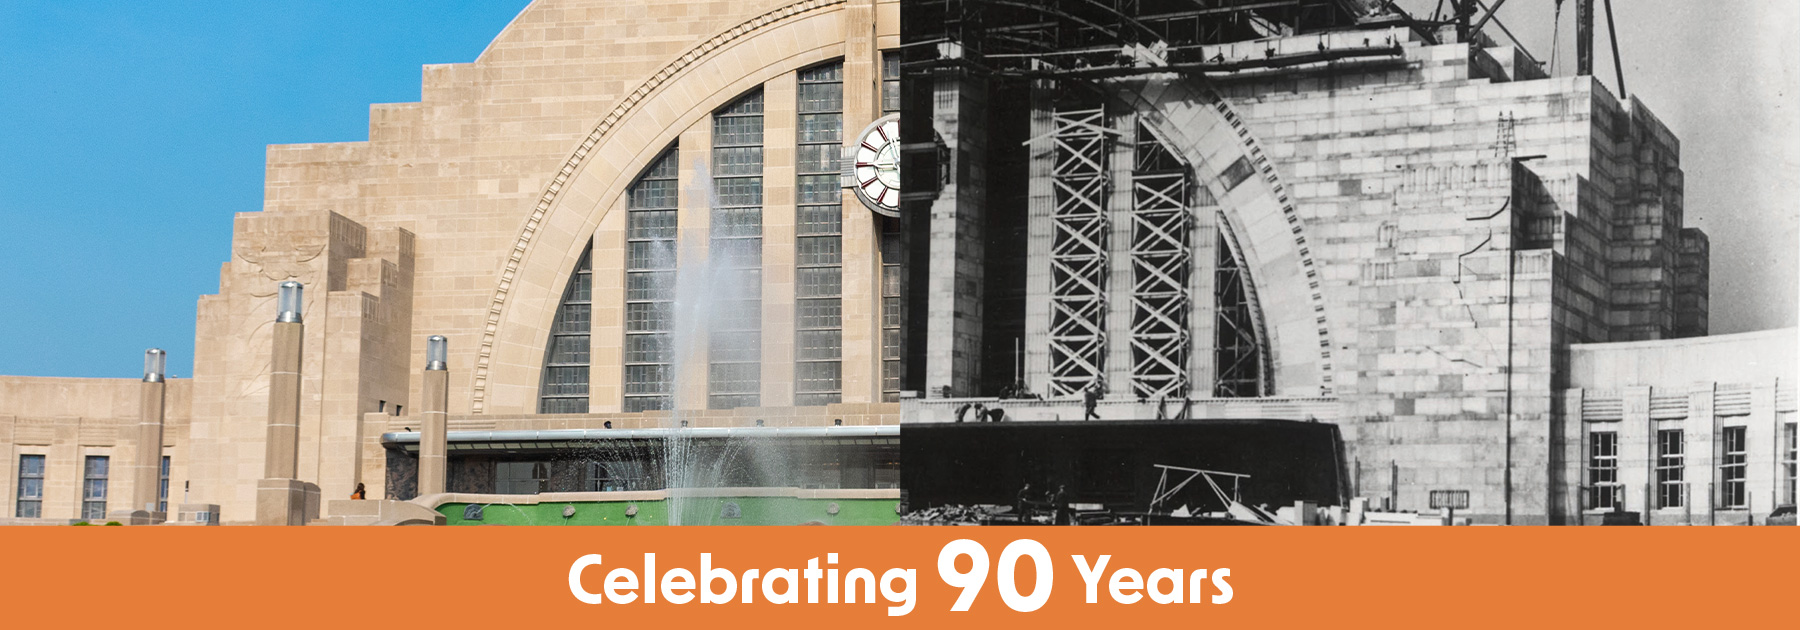 Celebrating 90 Years – Image collage of Union Terminal today and Union Terminal under construction